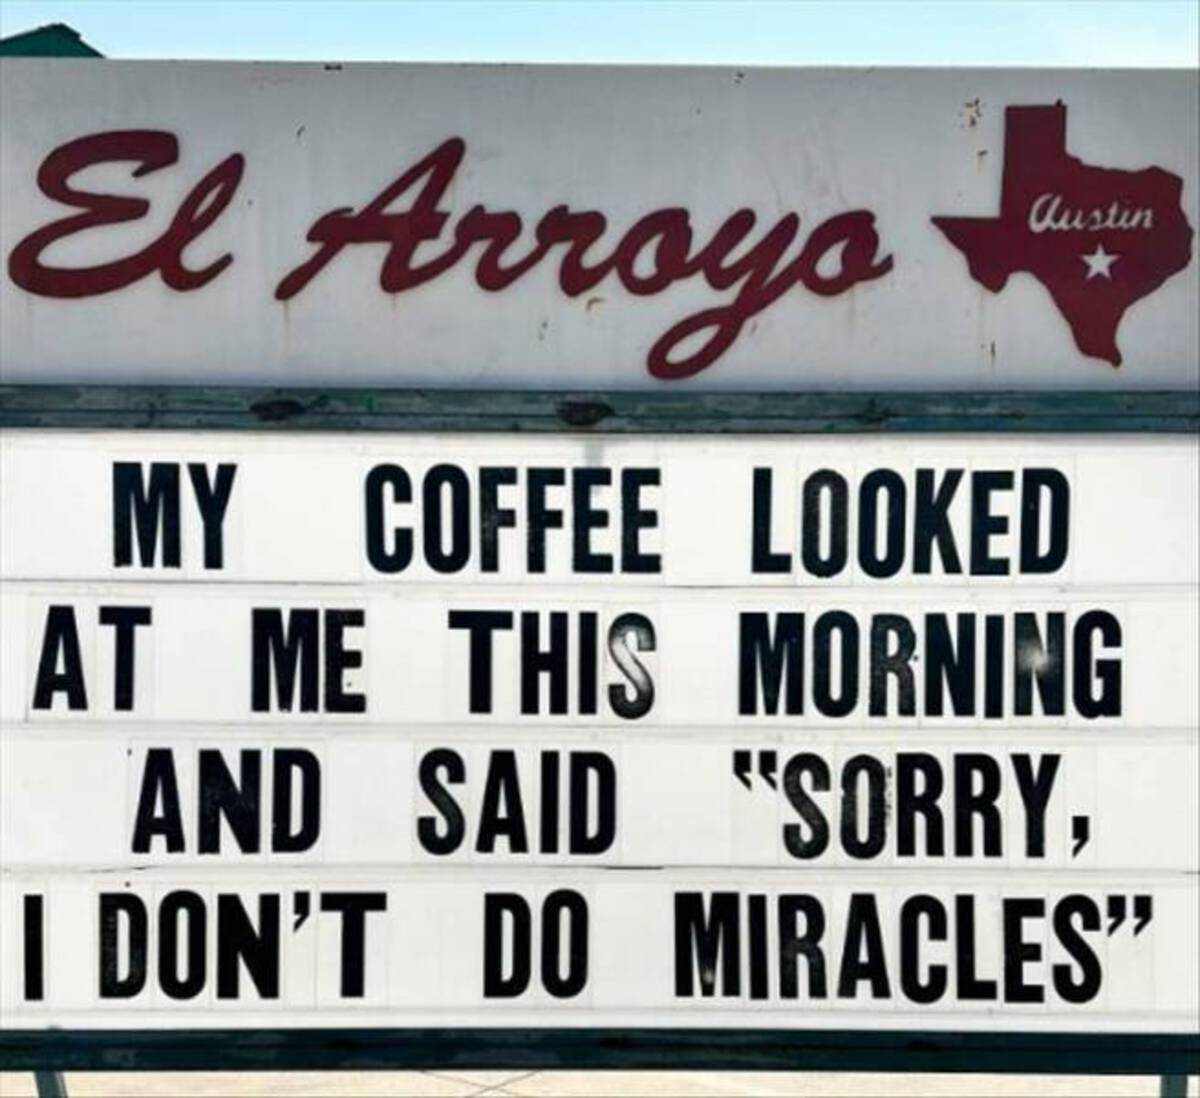 street sign - El Arroyo My Coffee Looked At Me This Morning And Said "Sorry, I Don'T Do Miracles" Austin